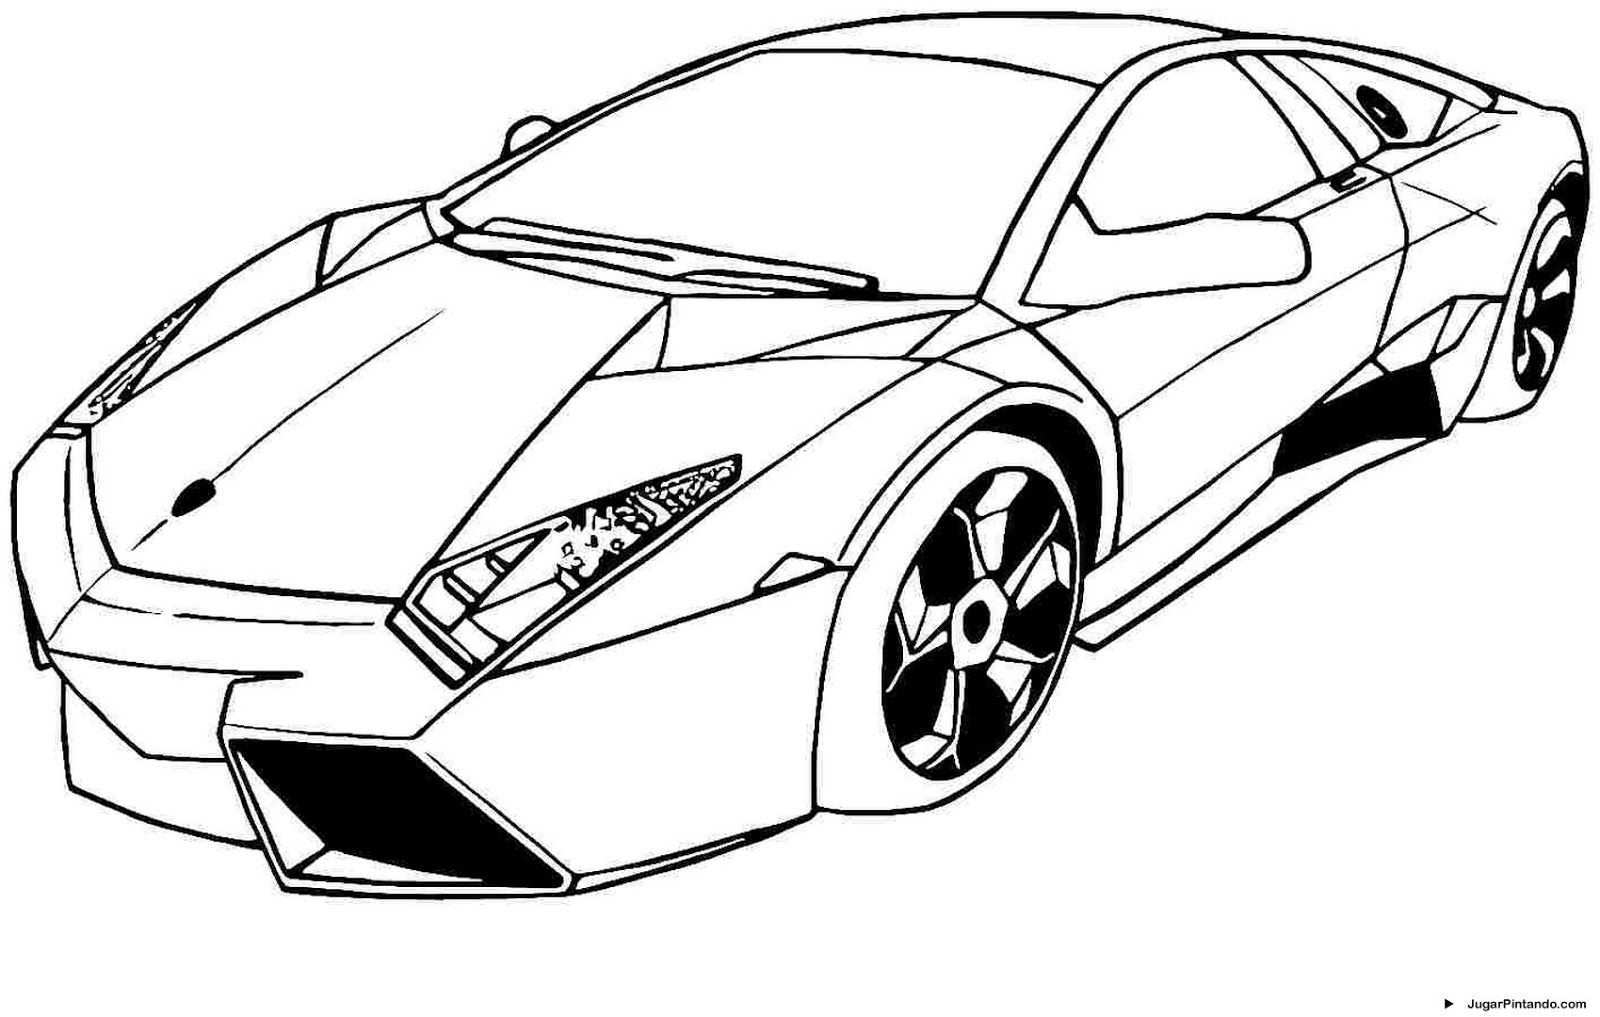 Cars Silhouettes Cars Coloring Pages Race Car Coloring Pages Sports Coloring Pages